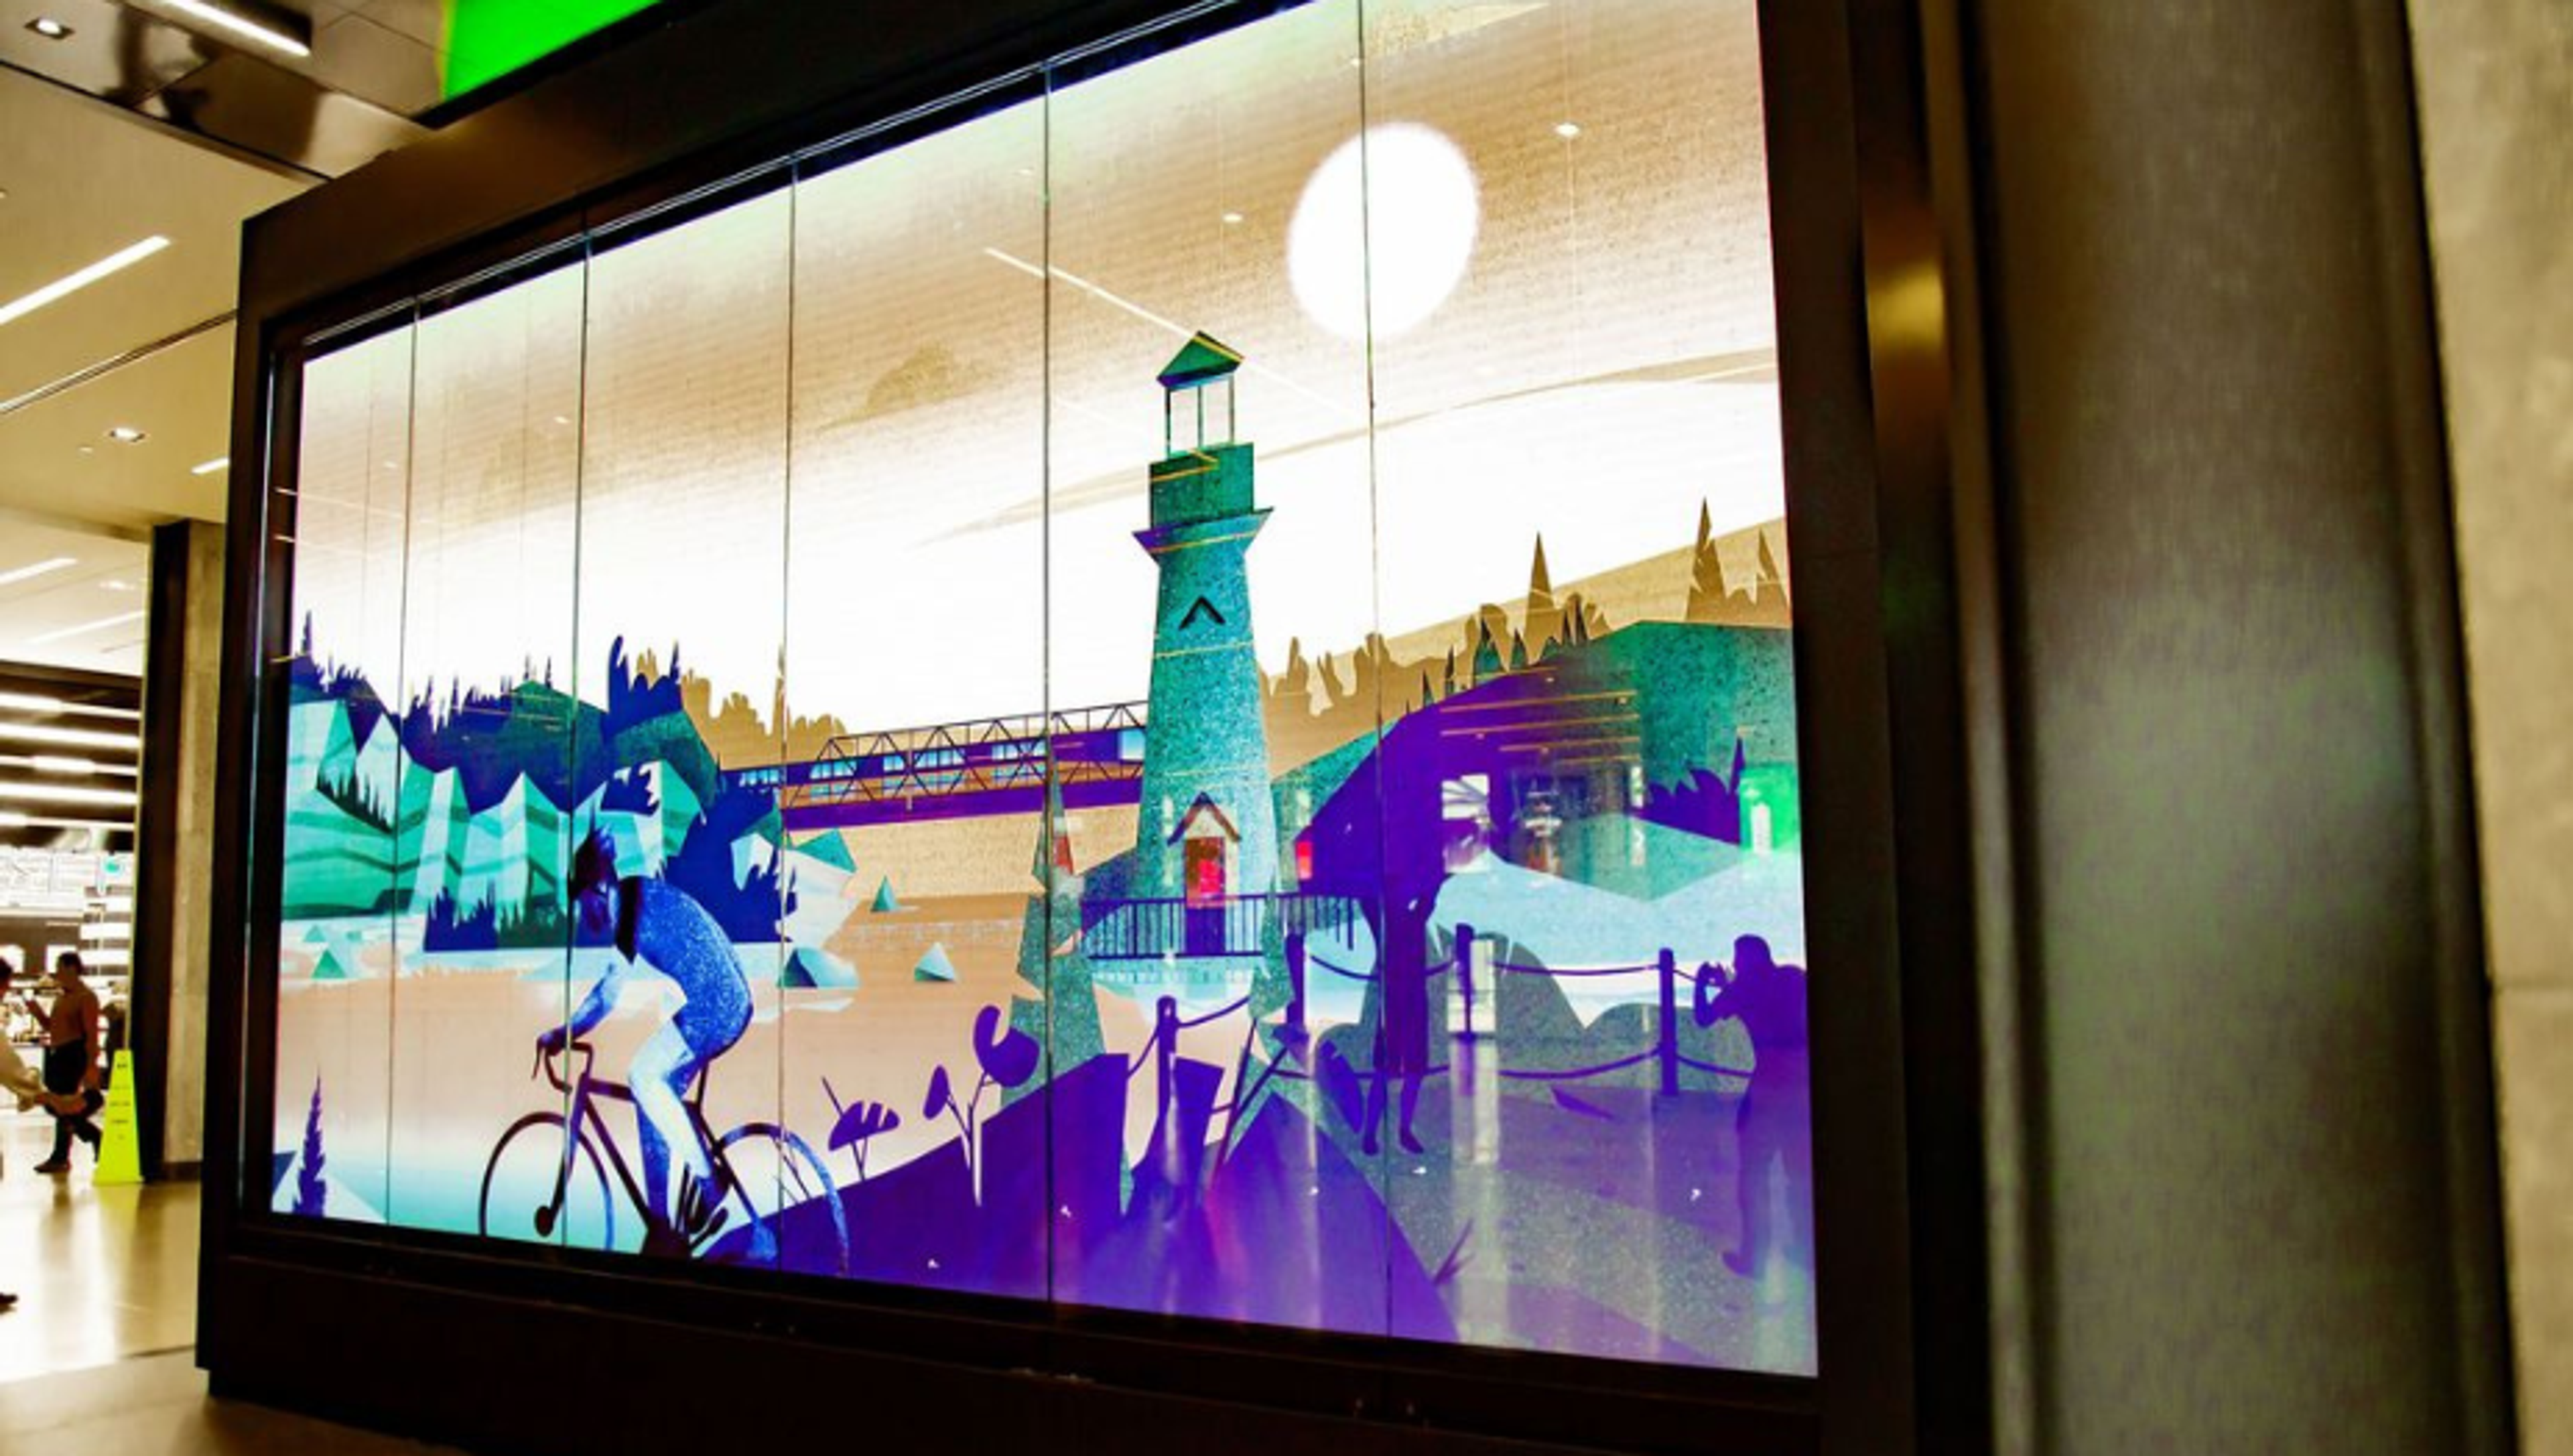 Data-Driven Generative Art Used Fir Canadian Bank's Video Wall at Busy Transit Hub Branch